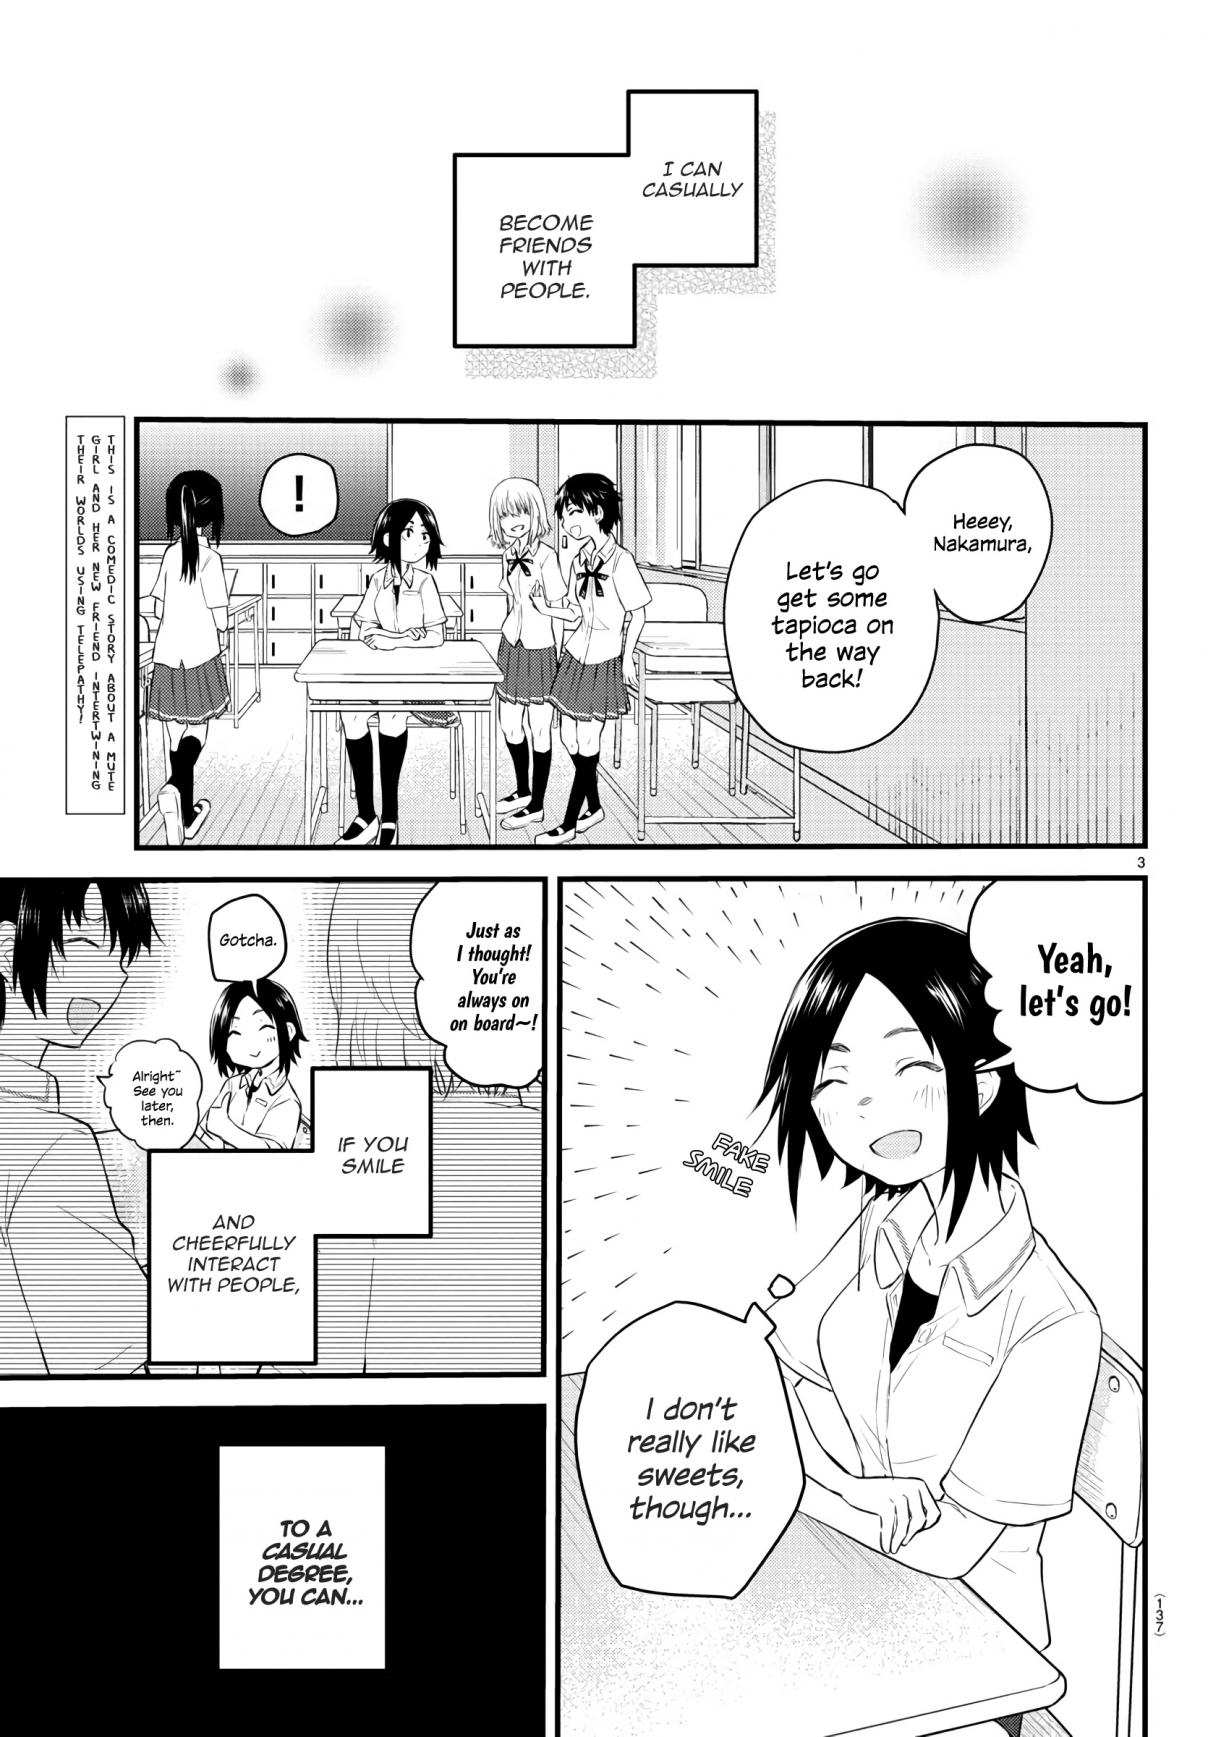 The Mute Girl and Her New Friend Vol. 1 Ch. 9 The Straightforward Duo